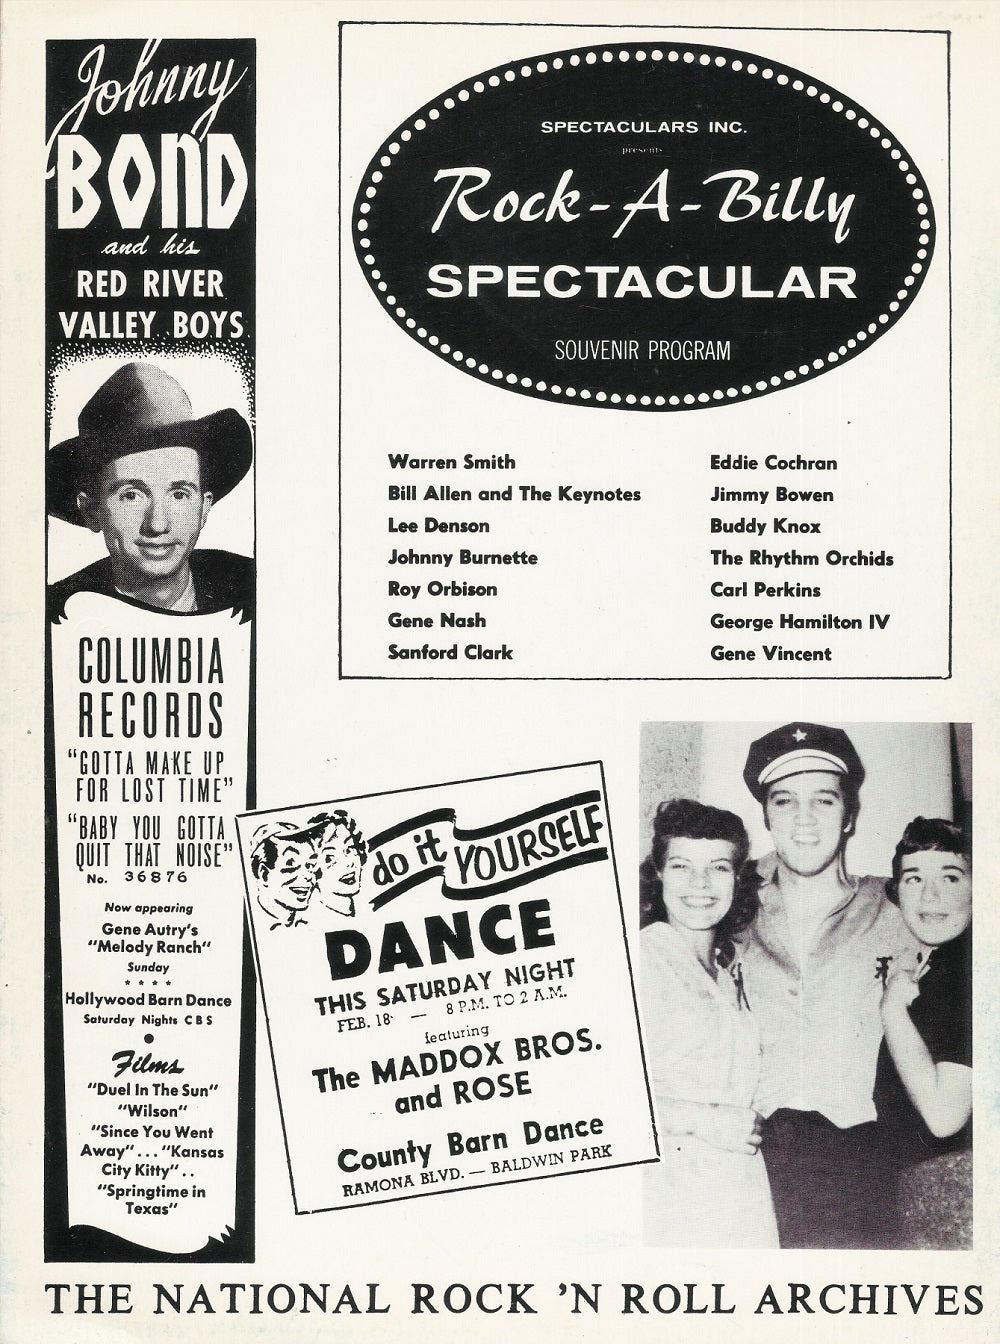 Buch - Rock-A-Billy & Country Legends Vol. 1